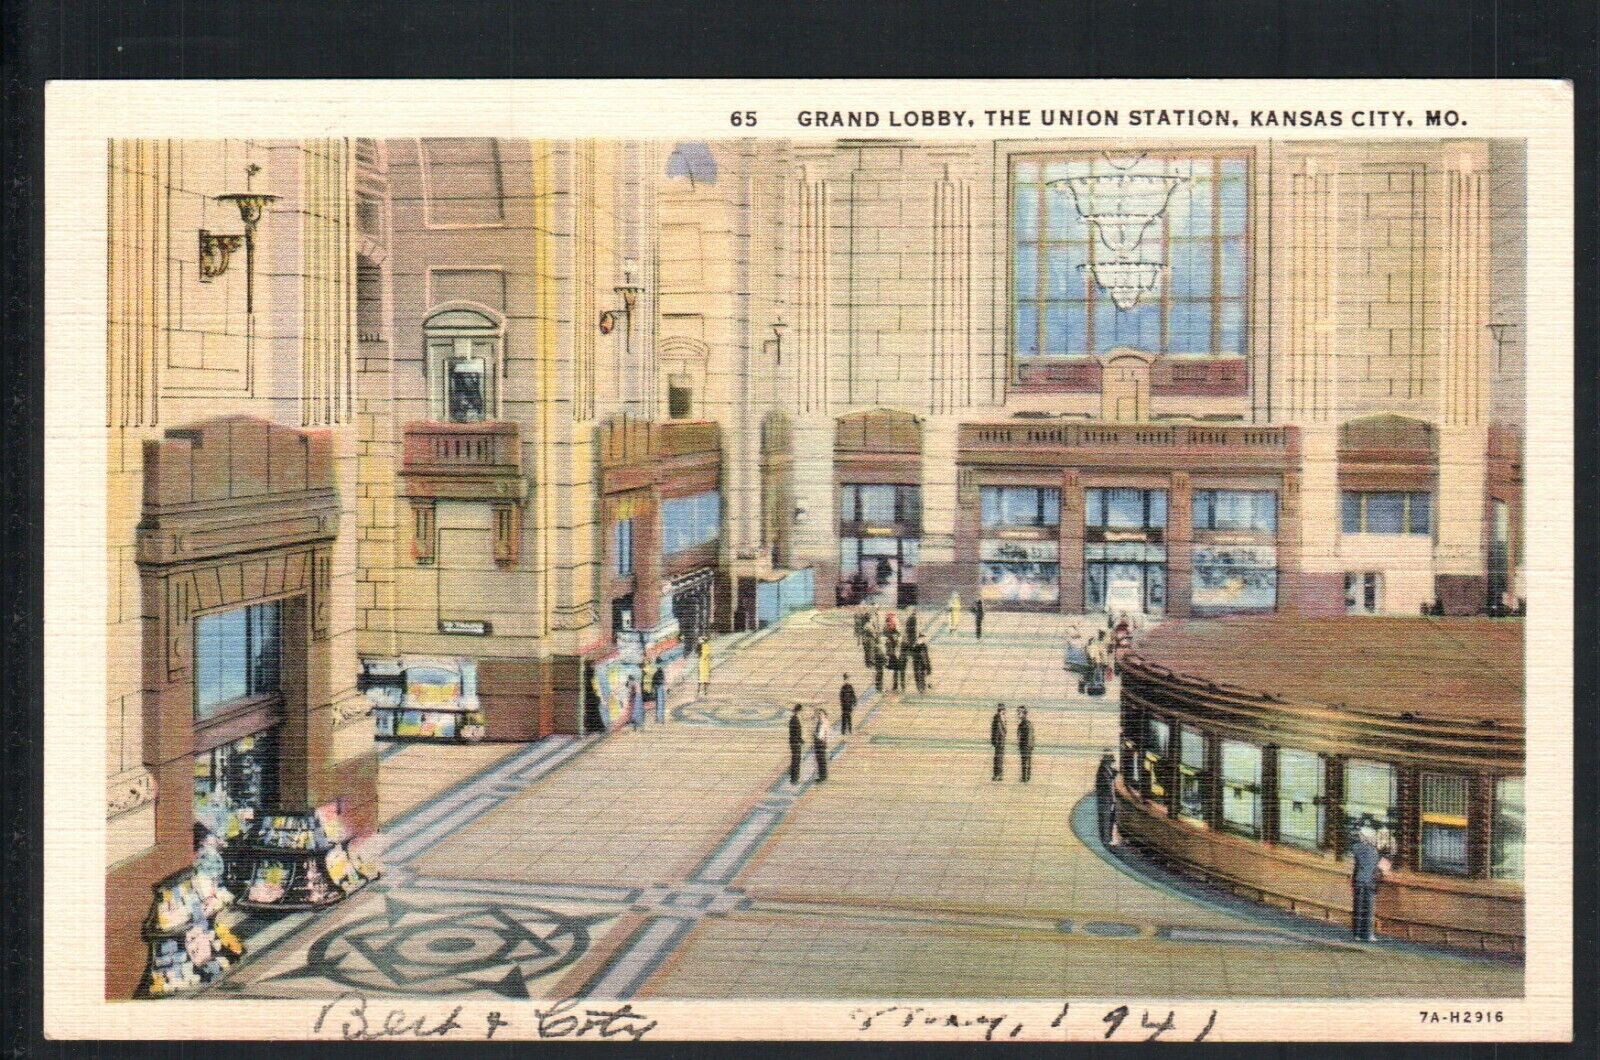 1941  KANSAS CITY, MO * THE UNION STATION GRAND LOBBY * POSTED KC VINTAGE LINEN